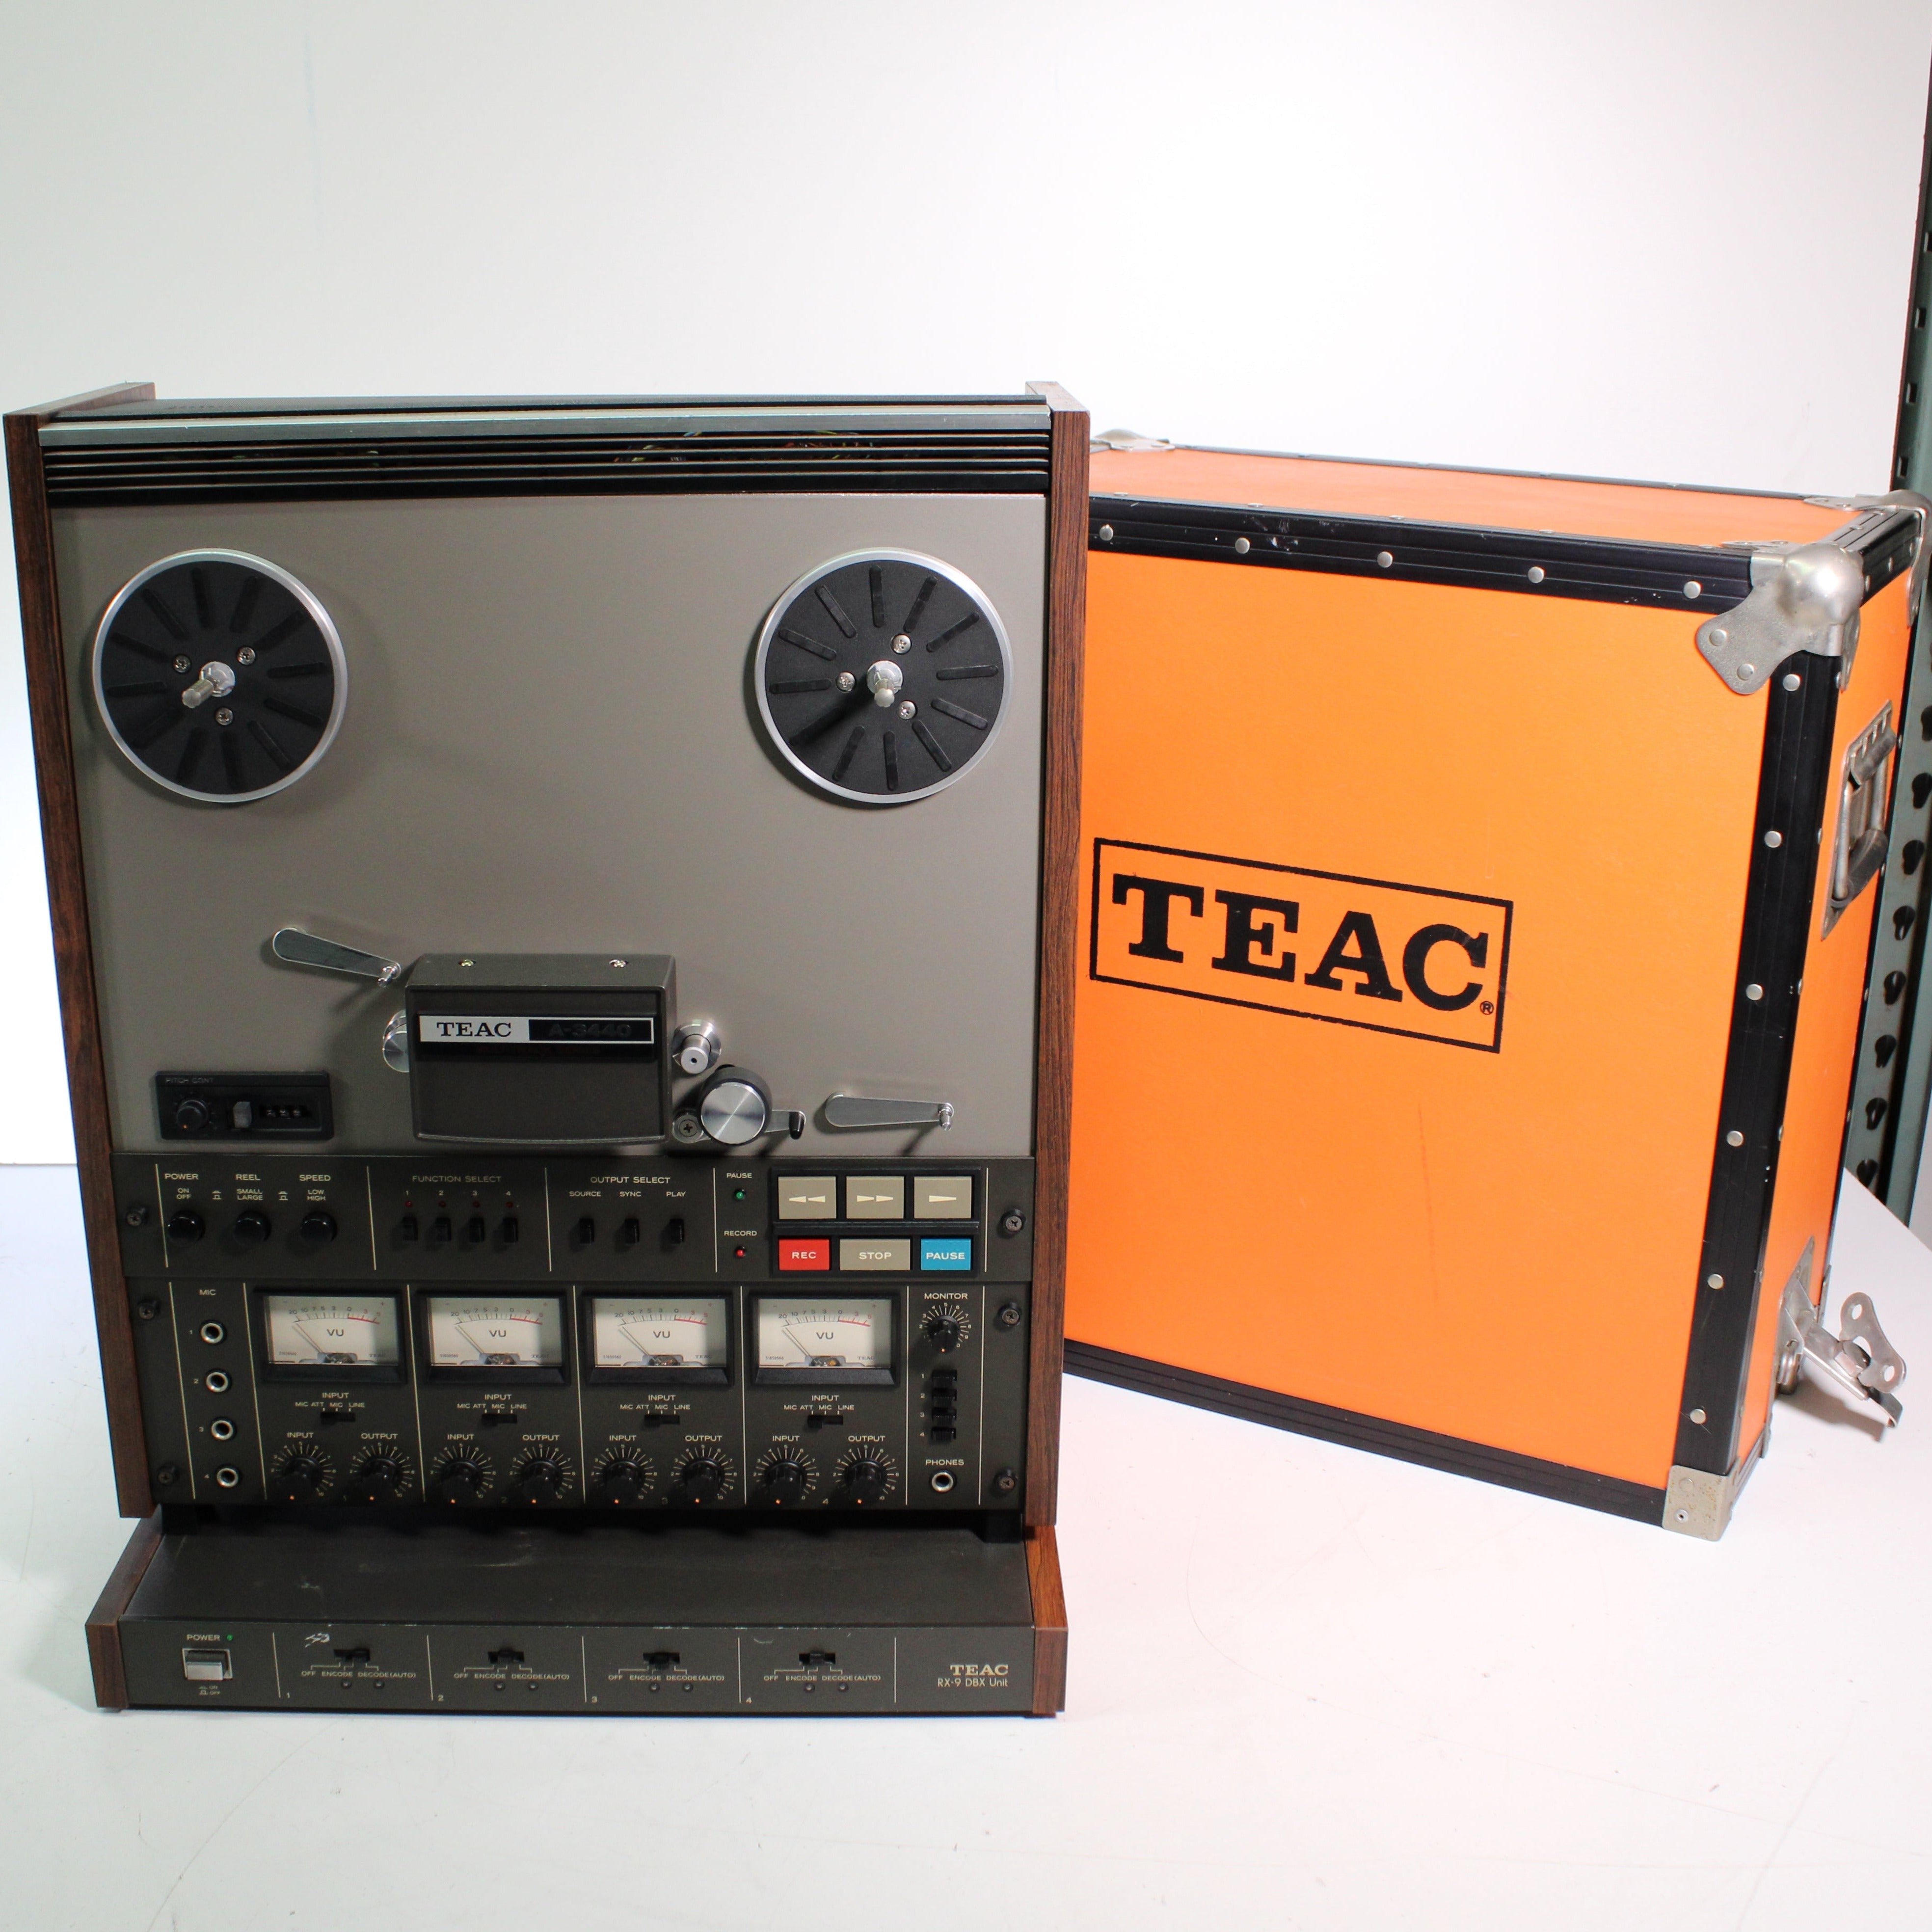 https://spencertified.com/cdn/shop/files/Teac-A-3440-Reel-to-Reel-Deck-and-RX-9-DBX-Unit-Bundle-with-Portable-Case-Reel-to-Reel-Tape-Players-Recorders-2.jpg?v=1710968341